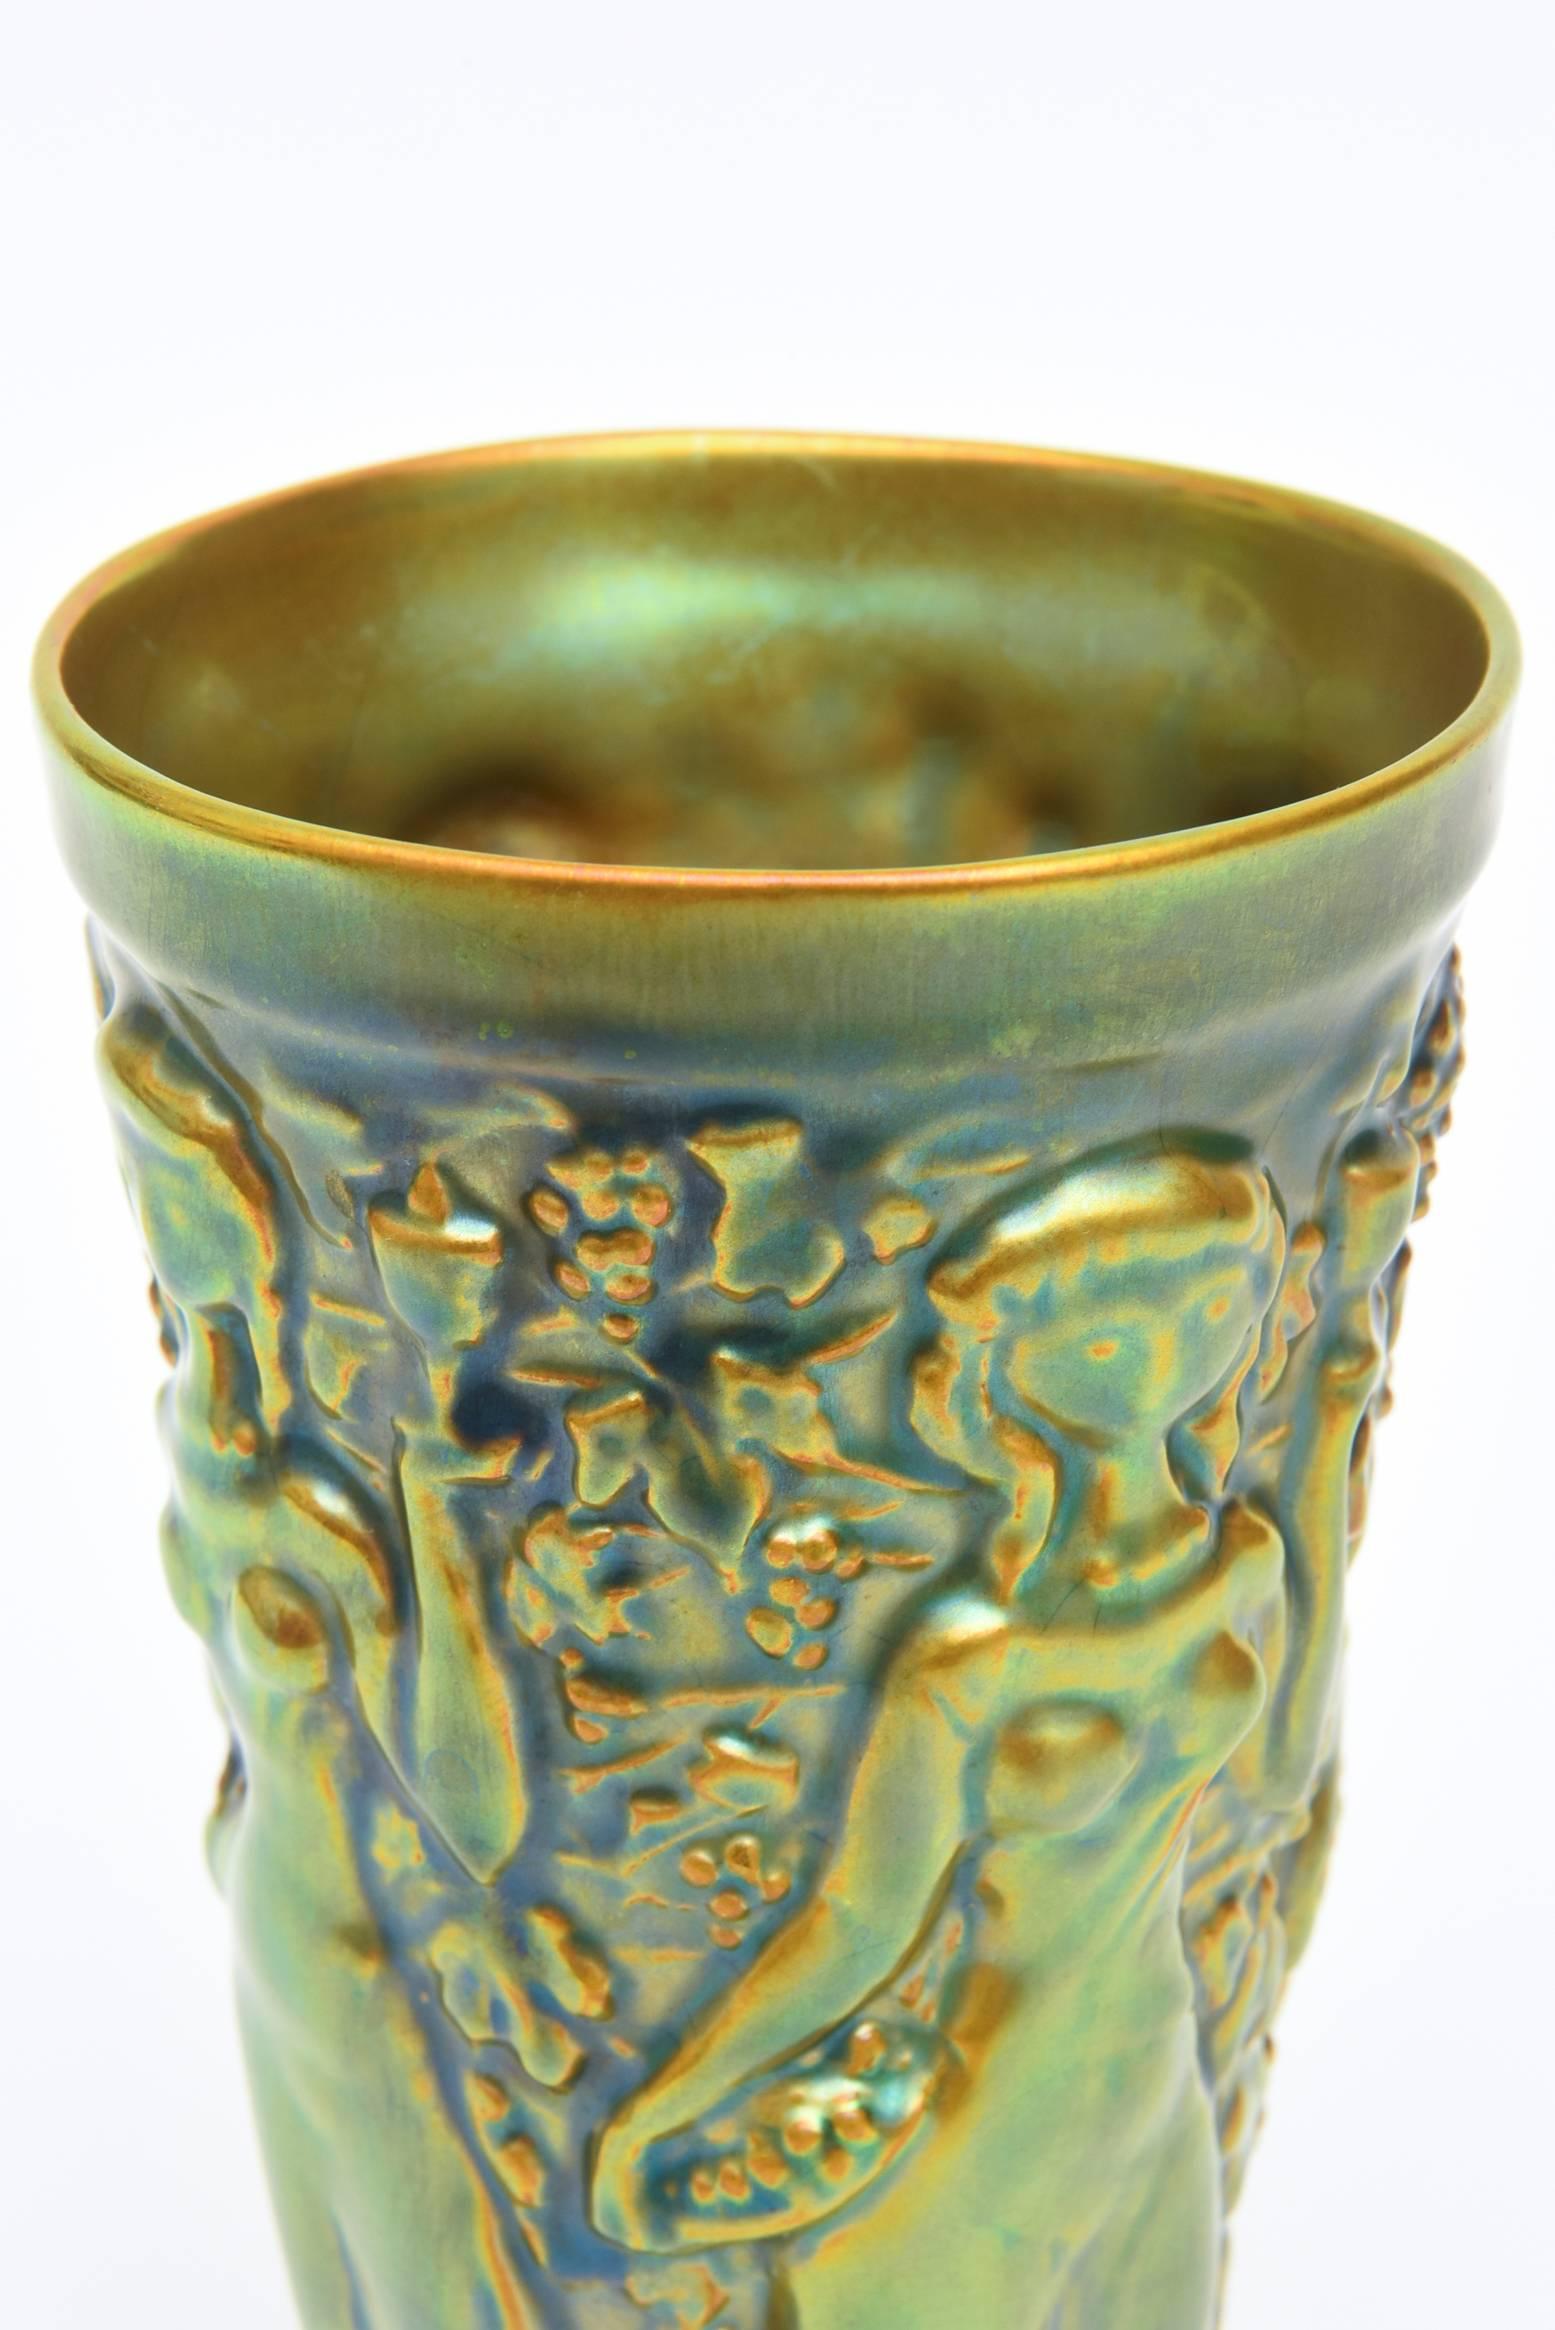 Art nouveau Zsolnay Vintage Glazed Green, Brown and Turquoise Nude Relief Ceramic Vase en vente